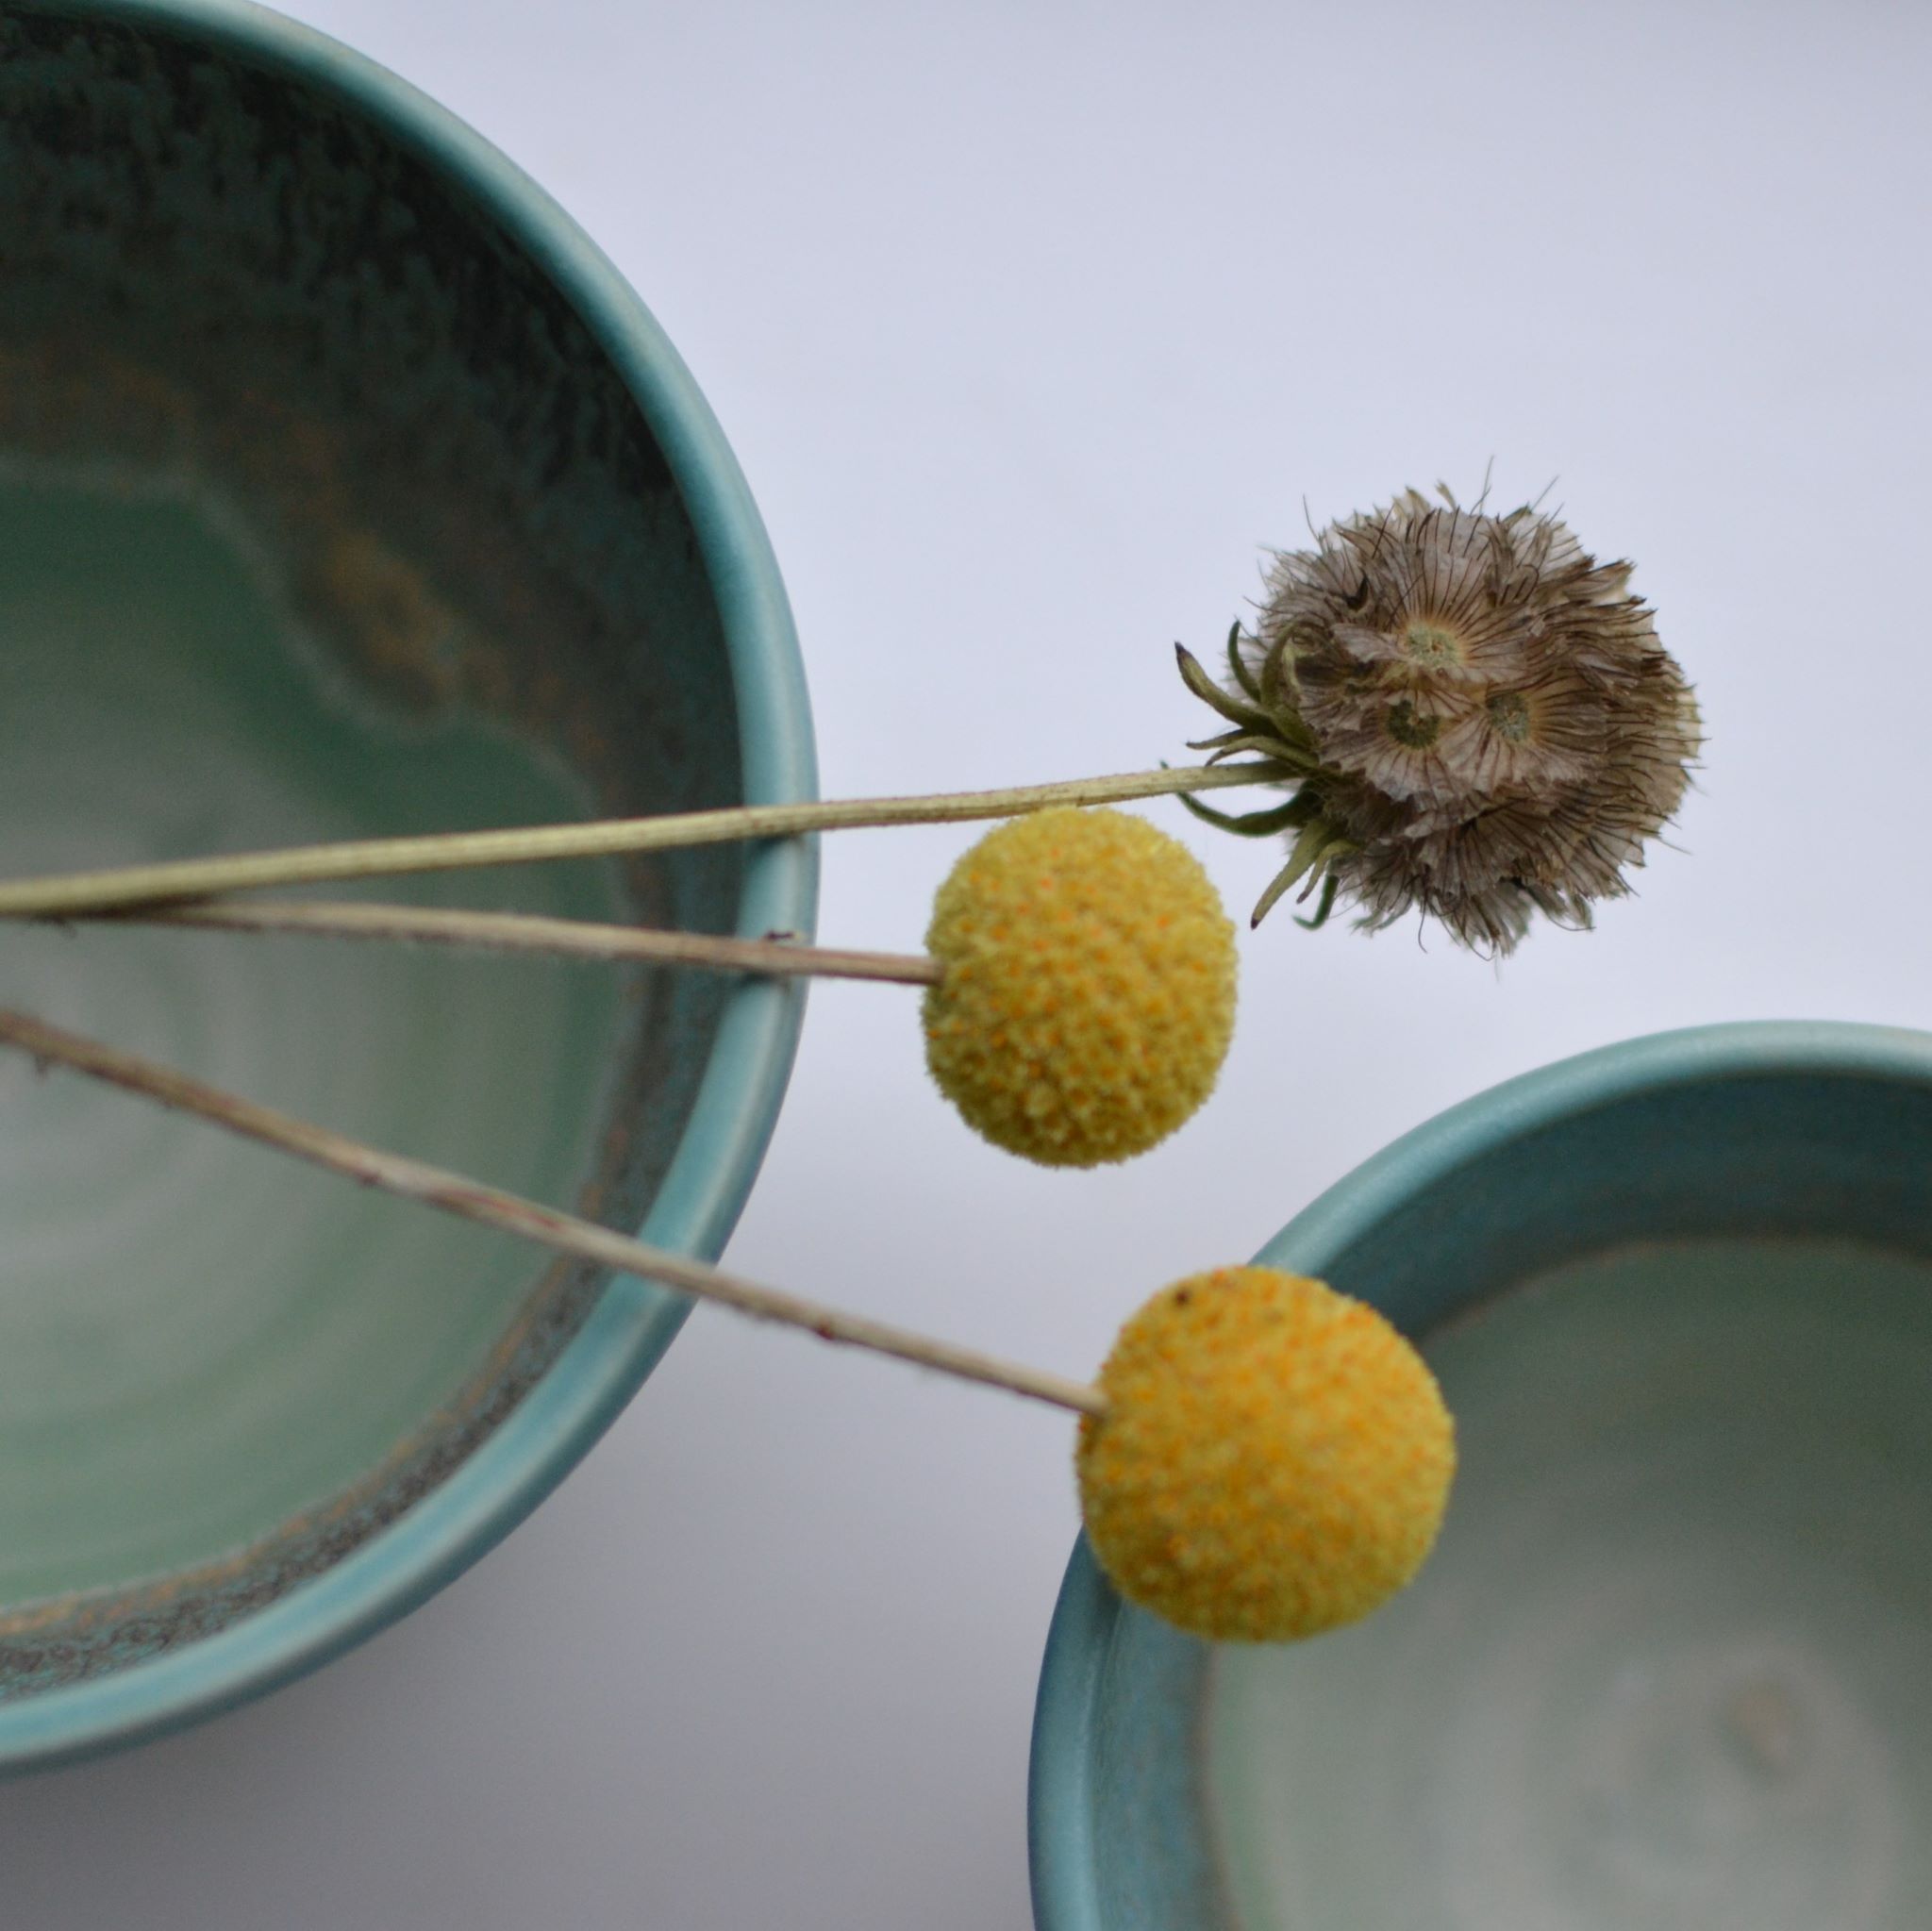 Two turquoise glazed bowls with dried flowers laid across them